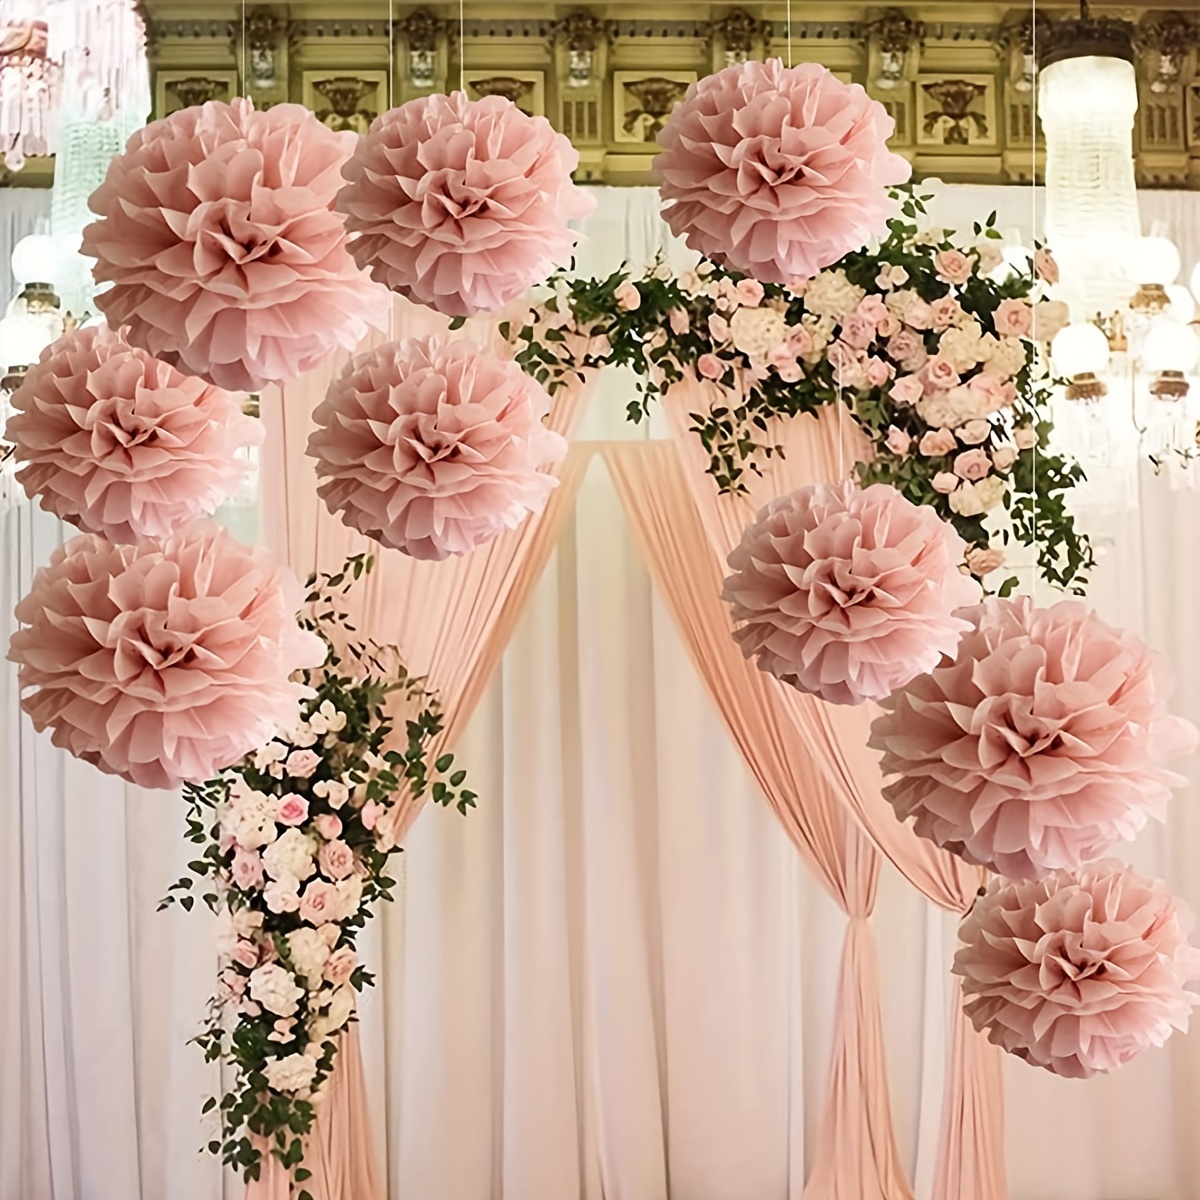 stage decoration with paper flowers